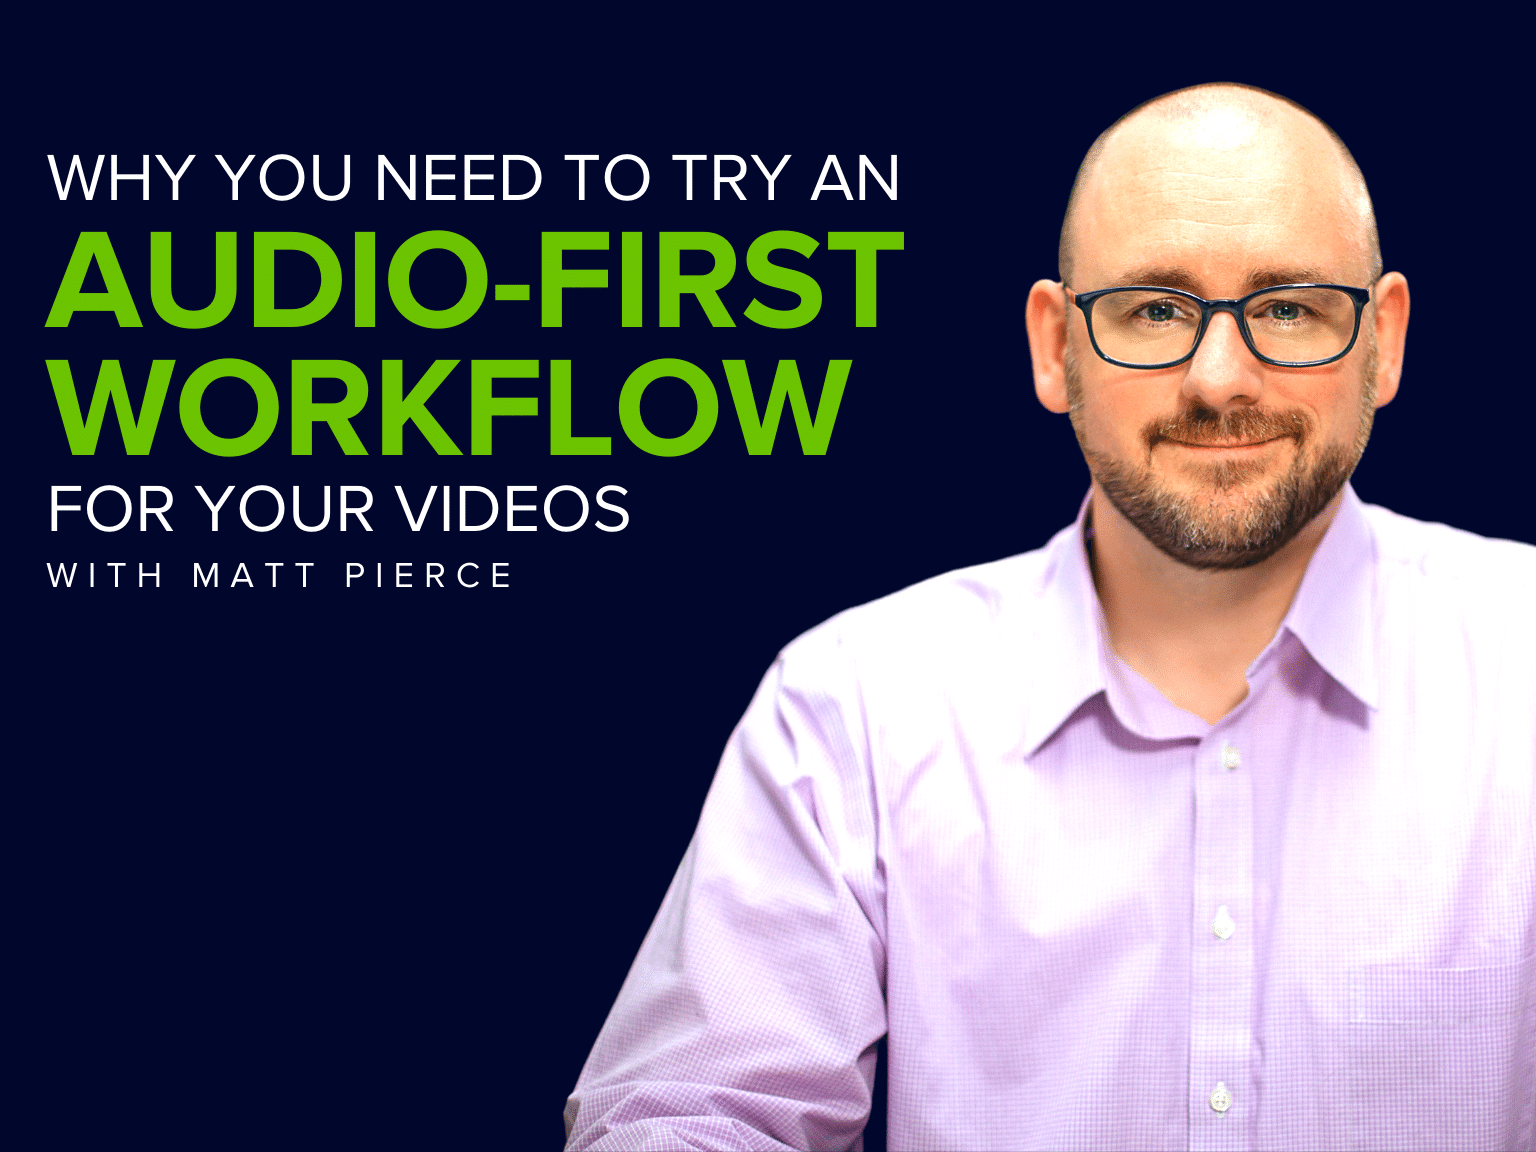 Why You Need to Try an Audio-First Workflow for Your Videos